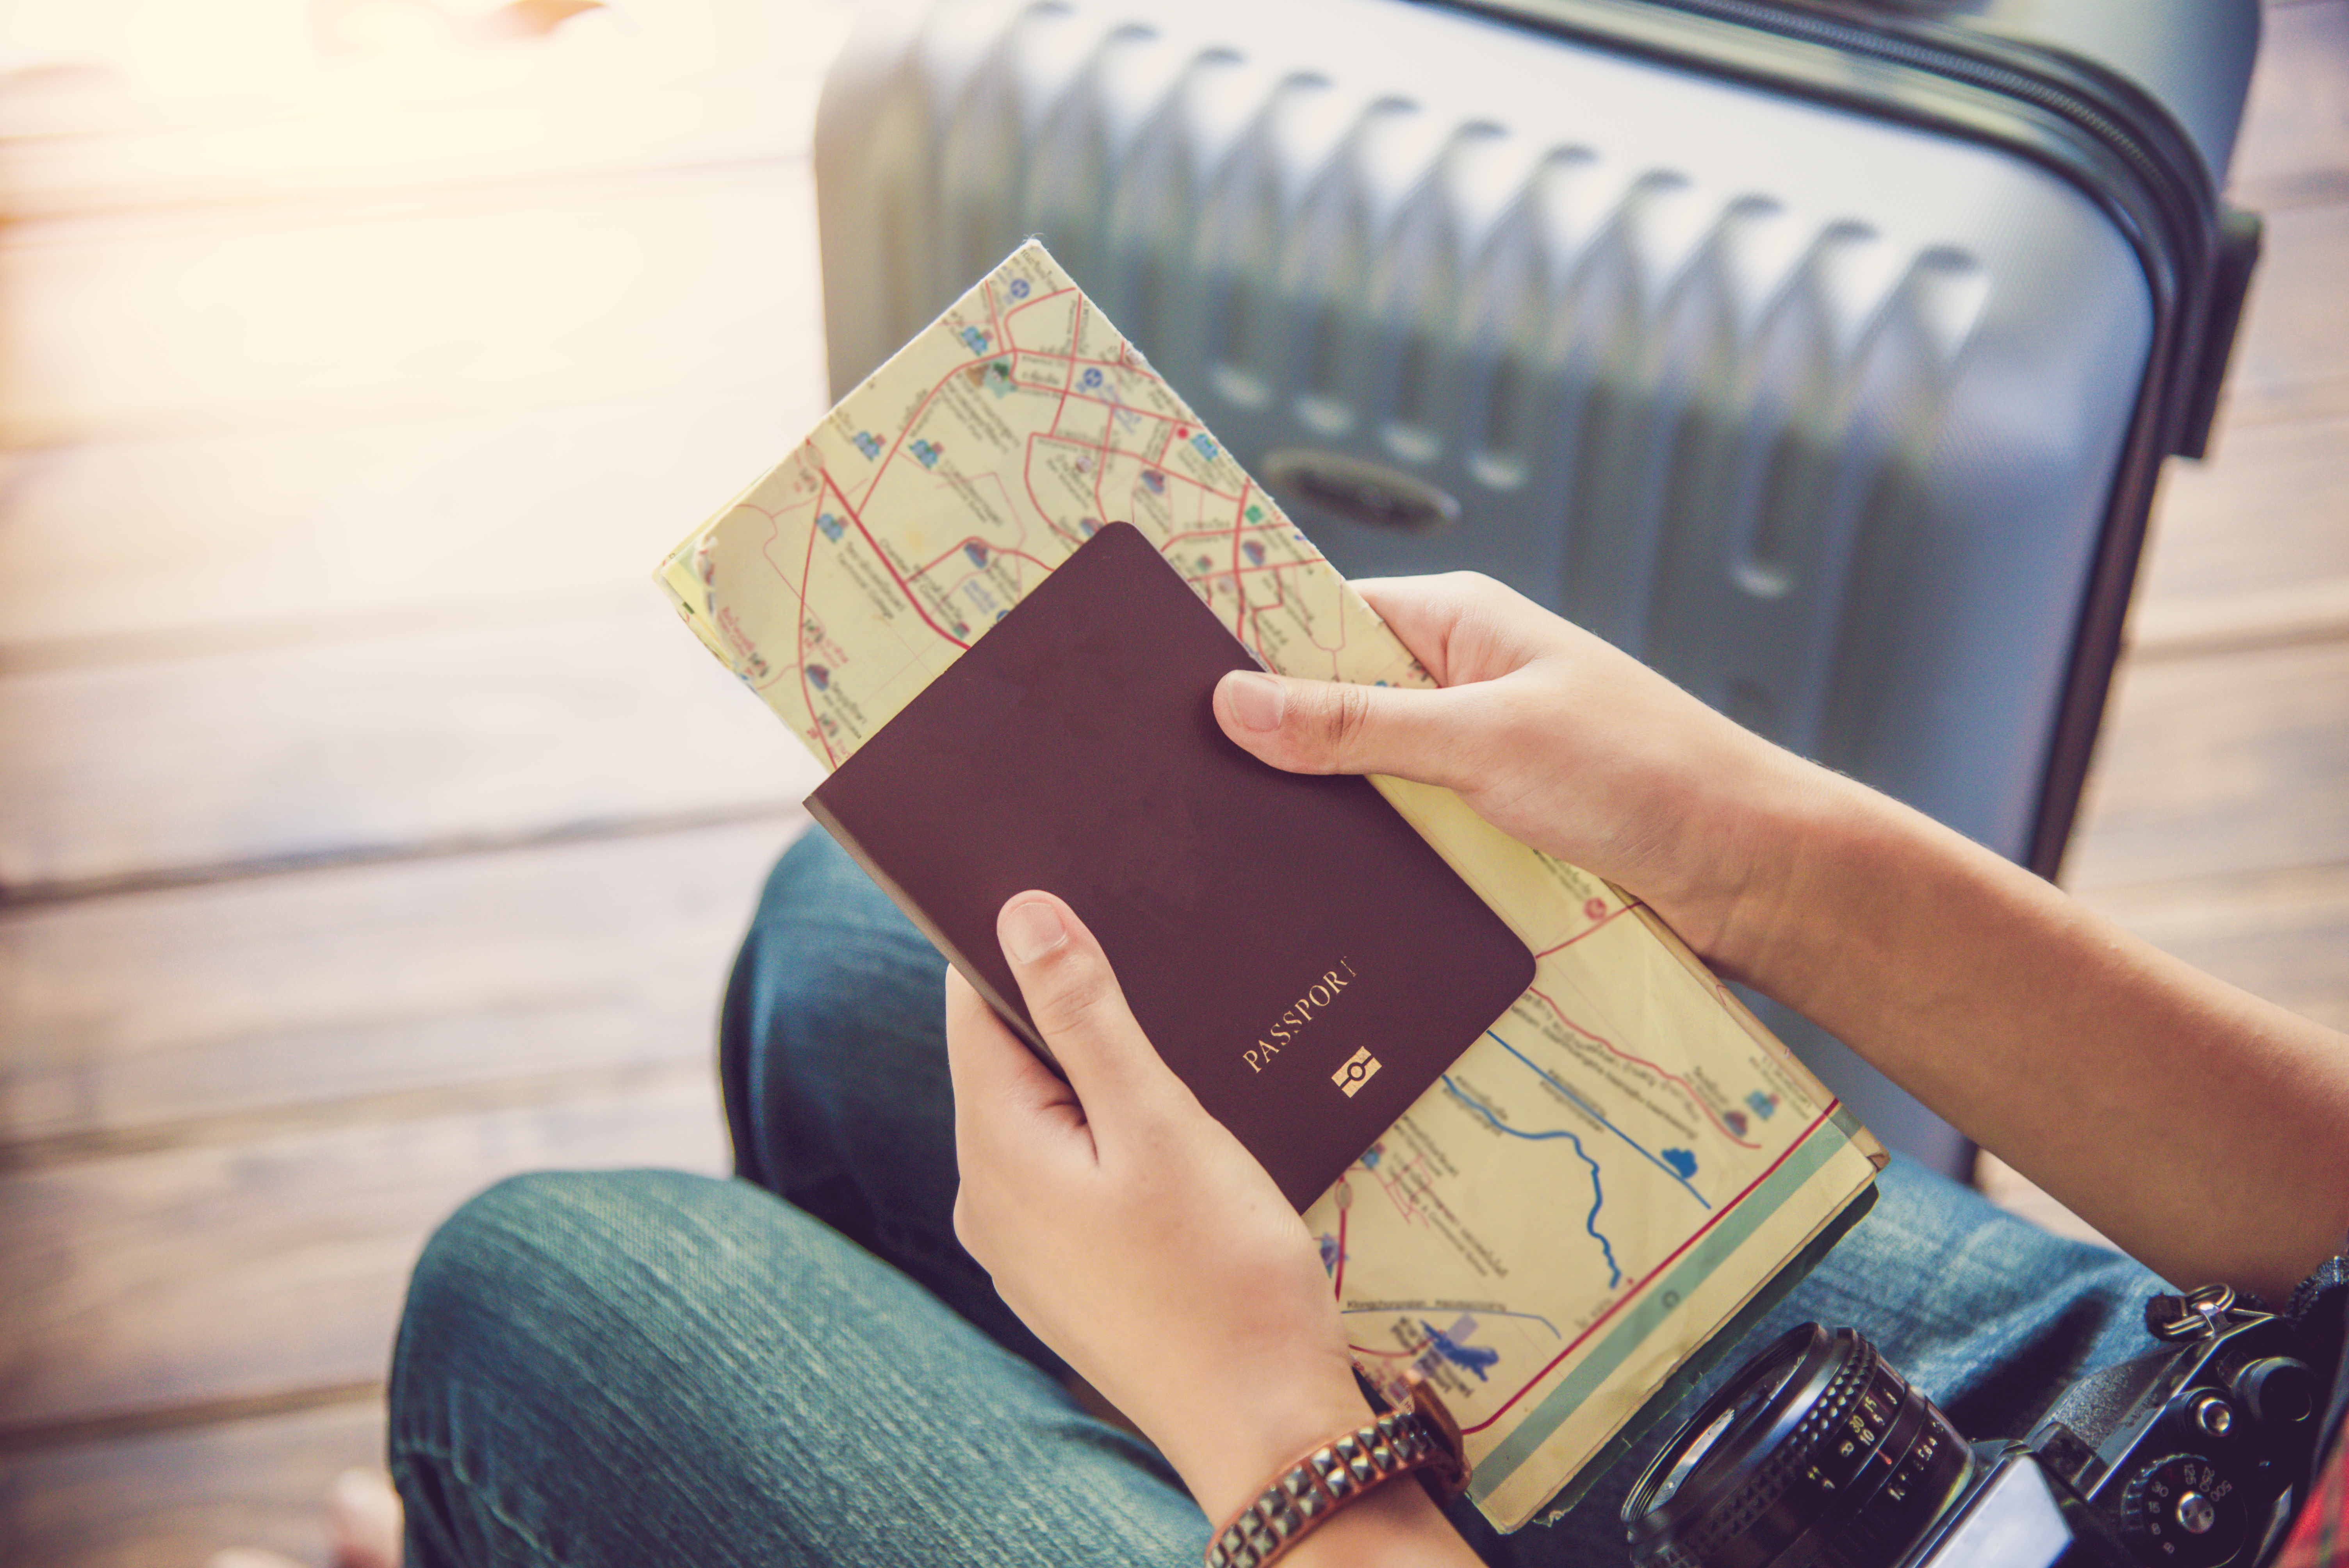 A person holding a passport and map | Source: Shutterstock